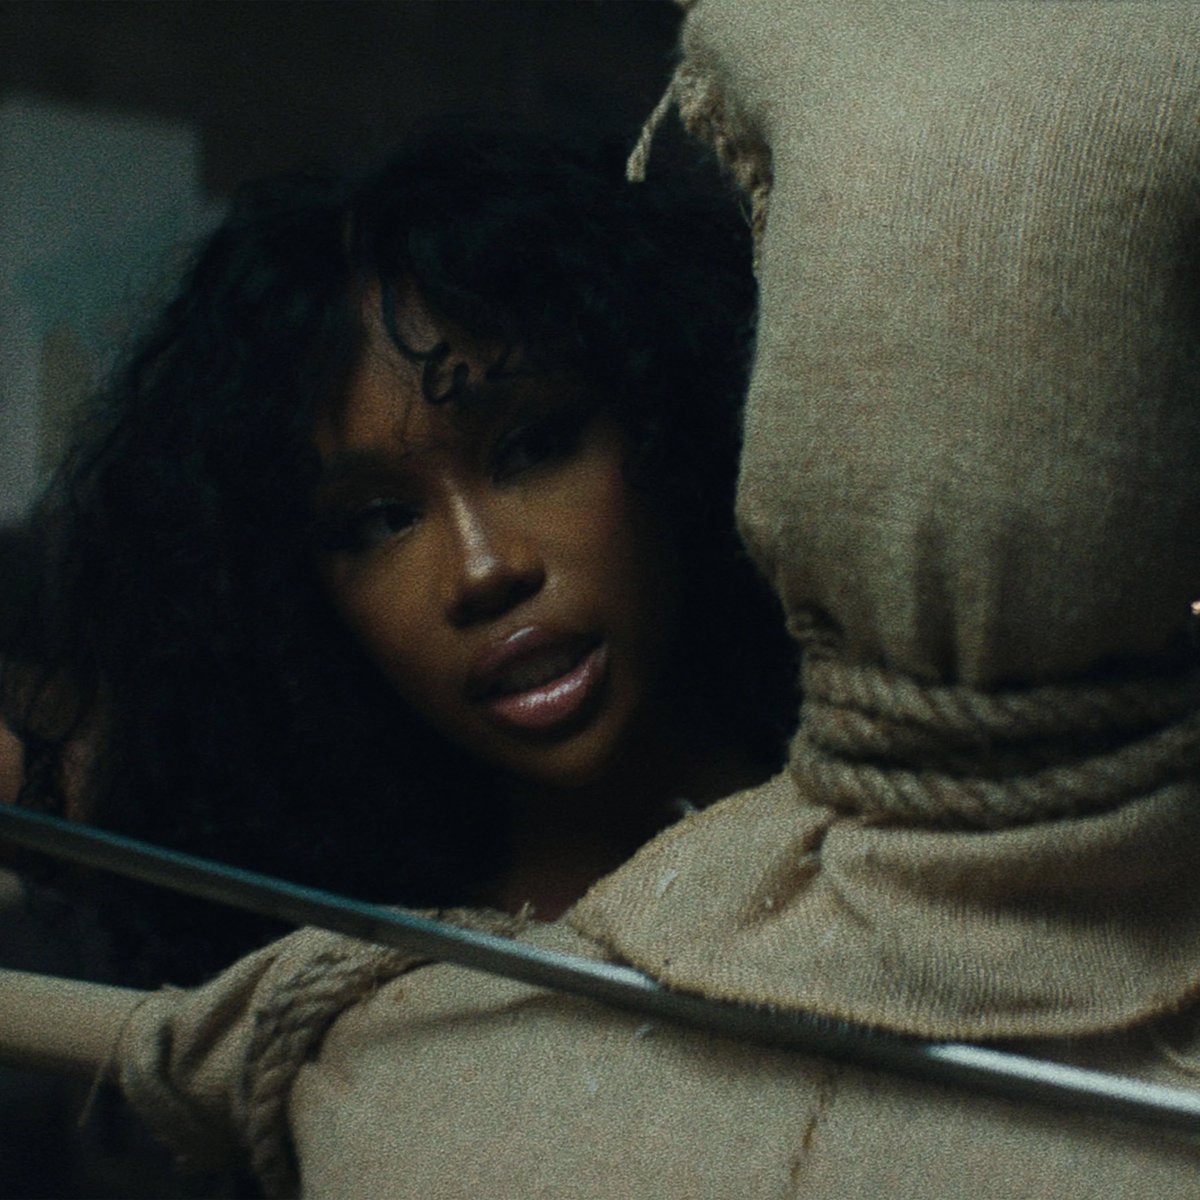 Apple Music ranks ‘SOS’ by SZA as the 72nd best album of all time.